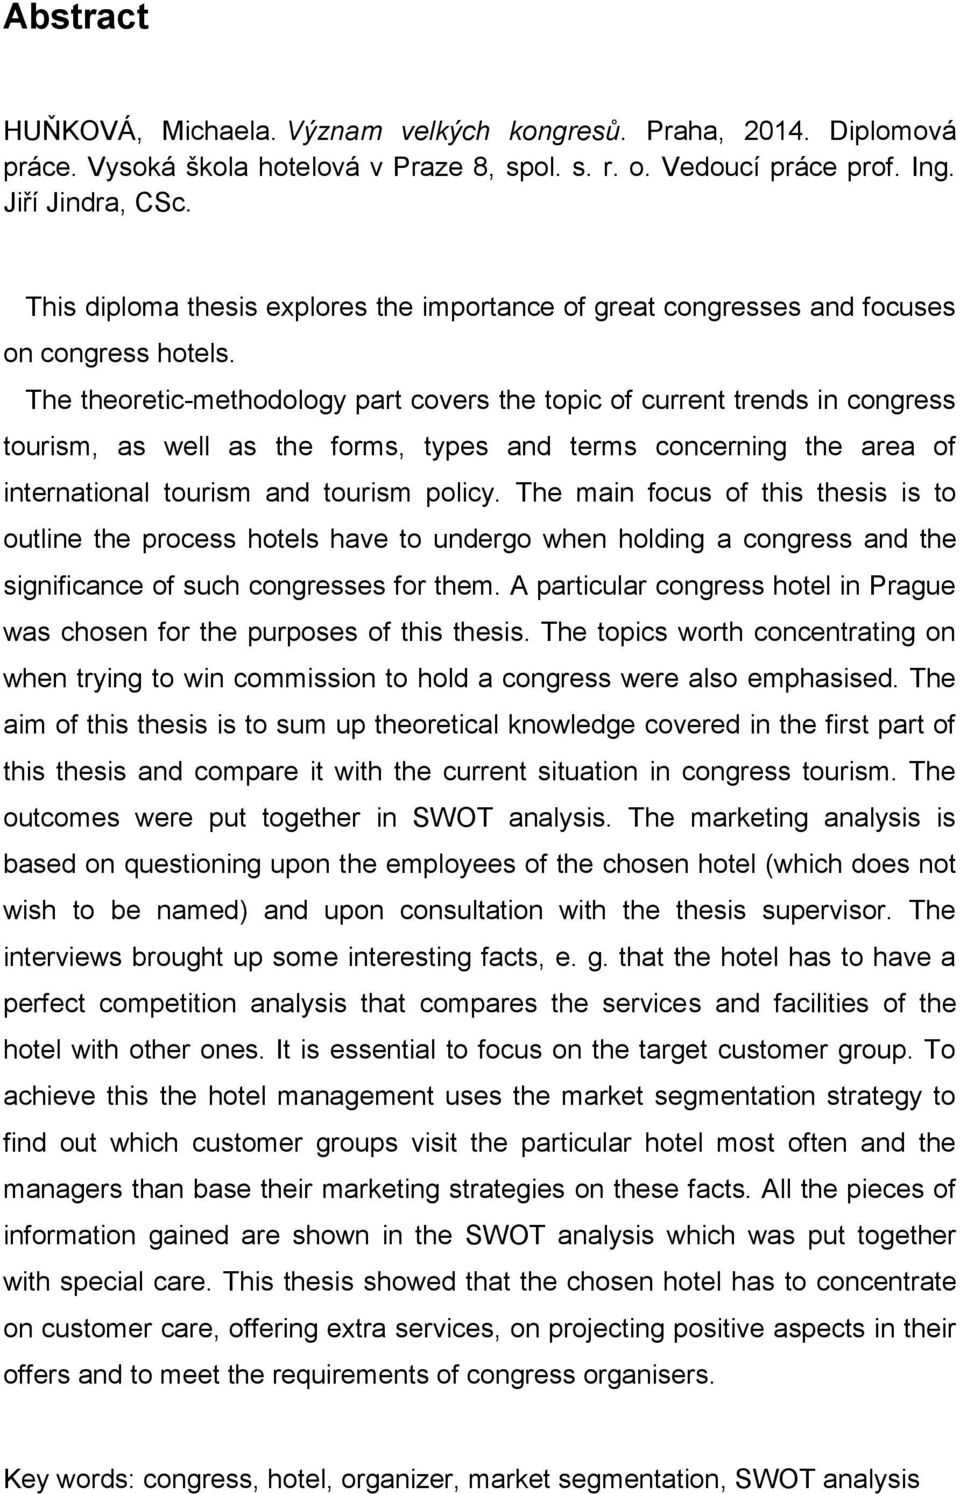 The theoretic-methodology part covers the topic of current trends in congress tourism, as well as the forms, types and terms concerning the area of international tourism and tourism policy.